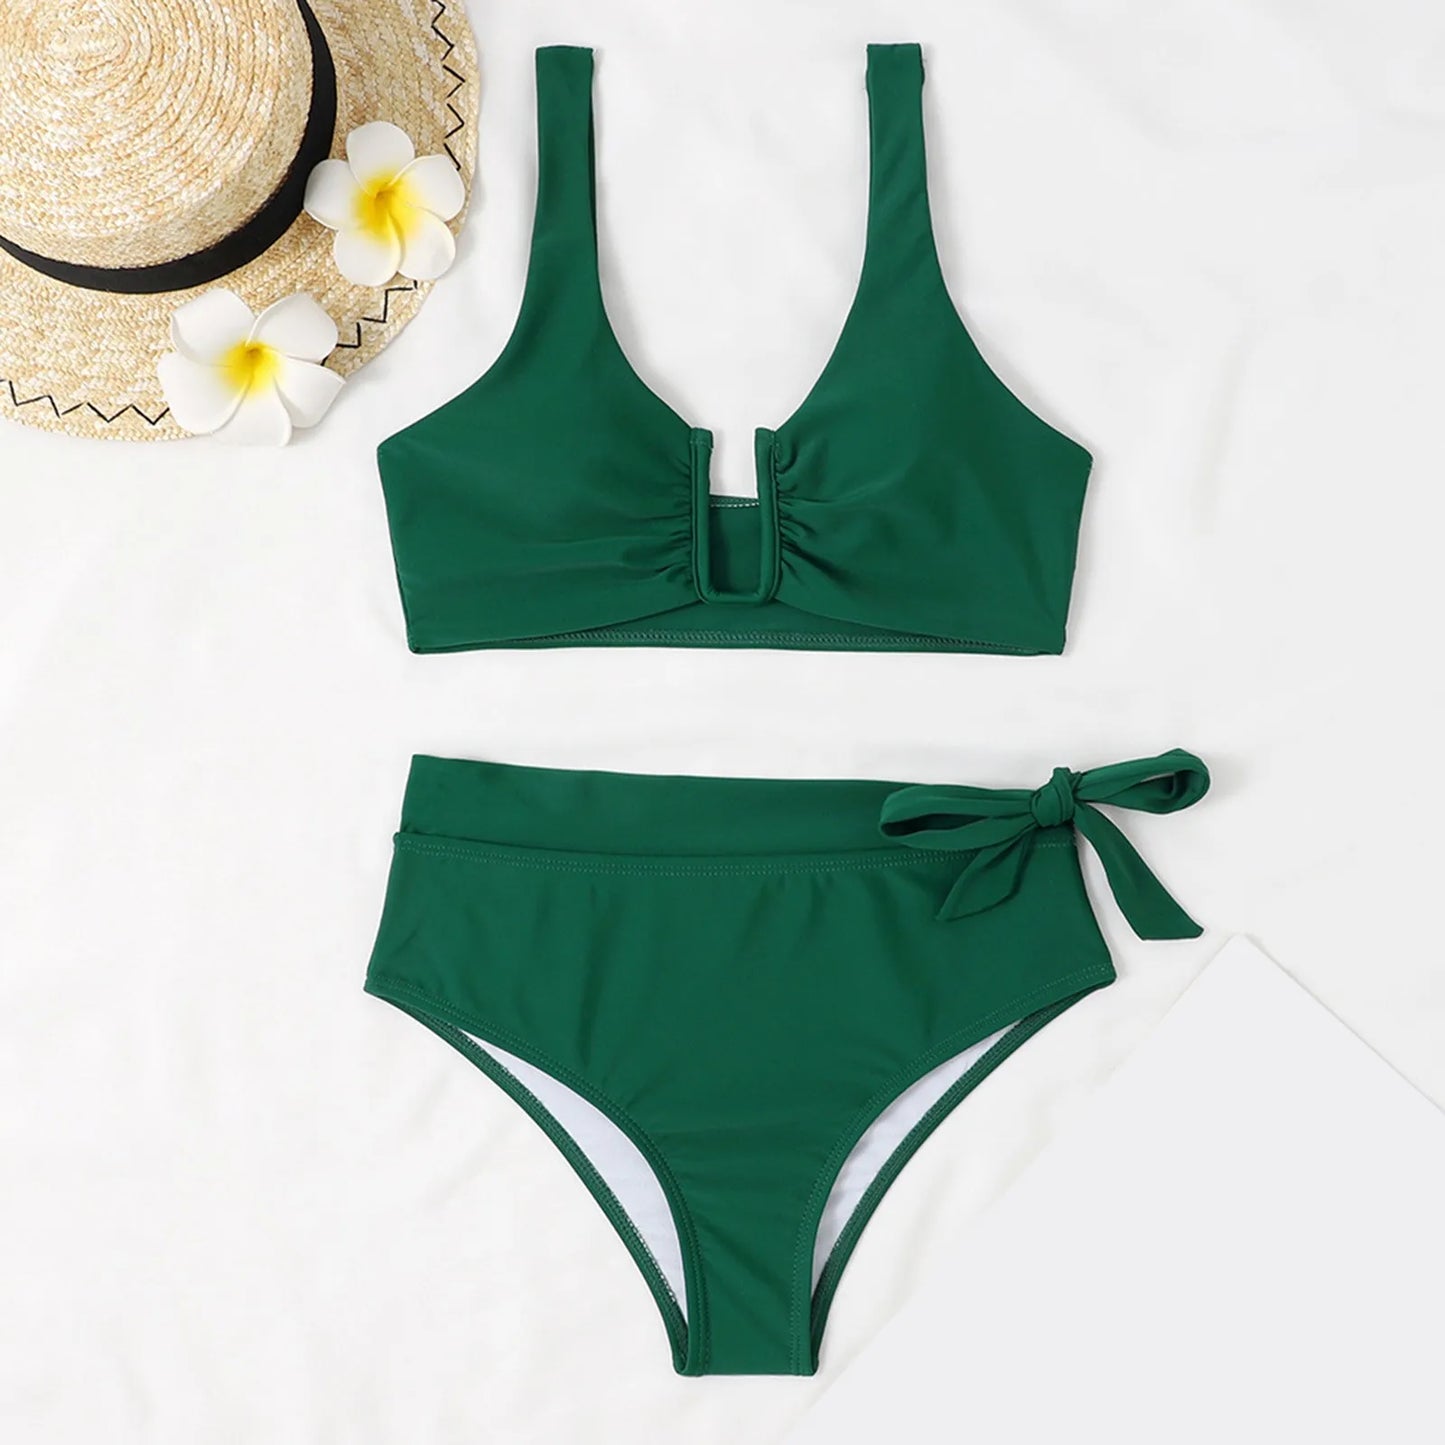 New Solid Color High Waist Split Bathing Suits With Shorts Bottoms Bikini Sets